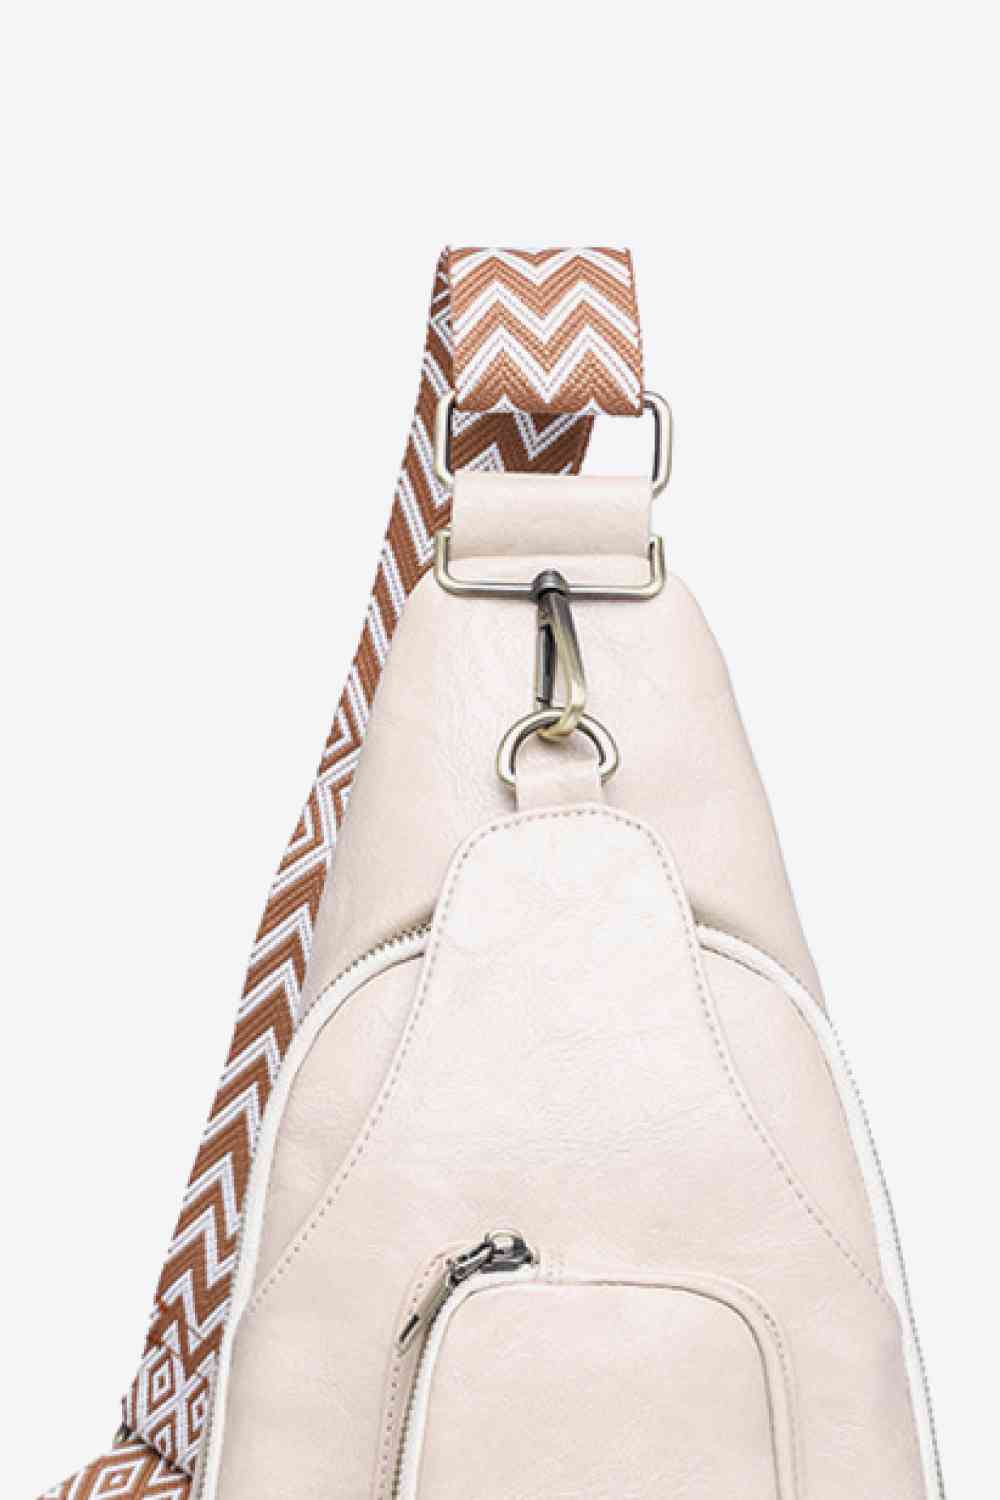 Adored Take A Trip PU Leather Sling Bag - ChicaLux